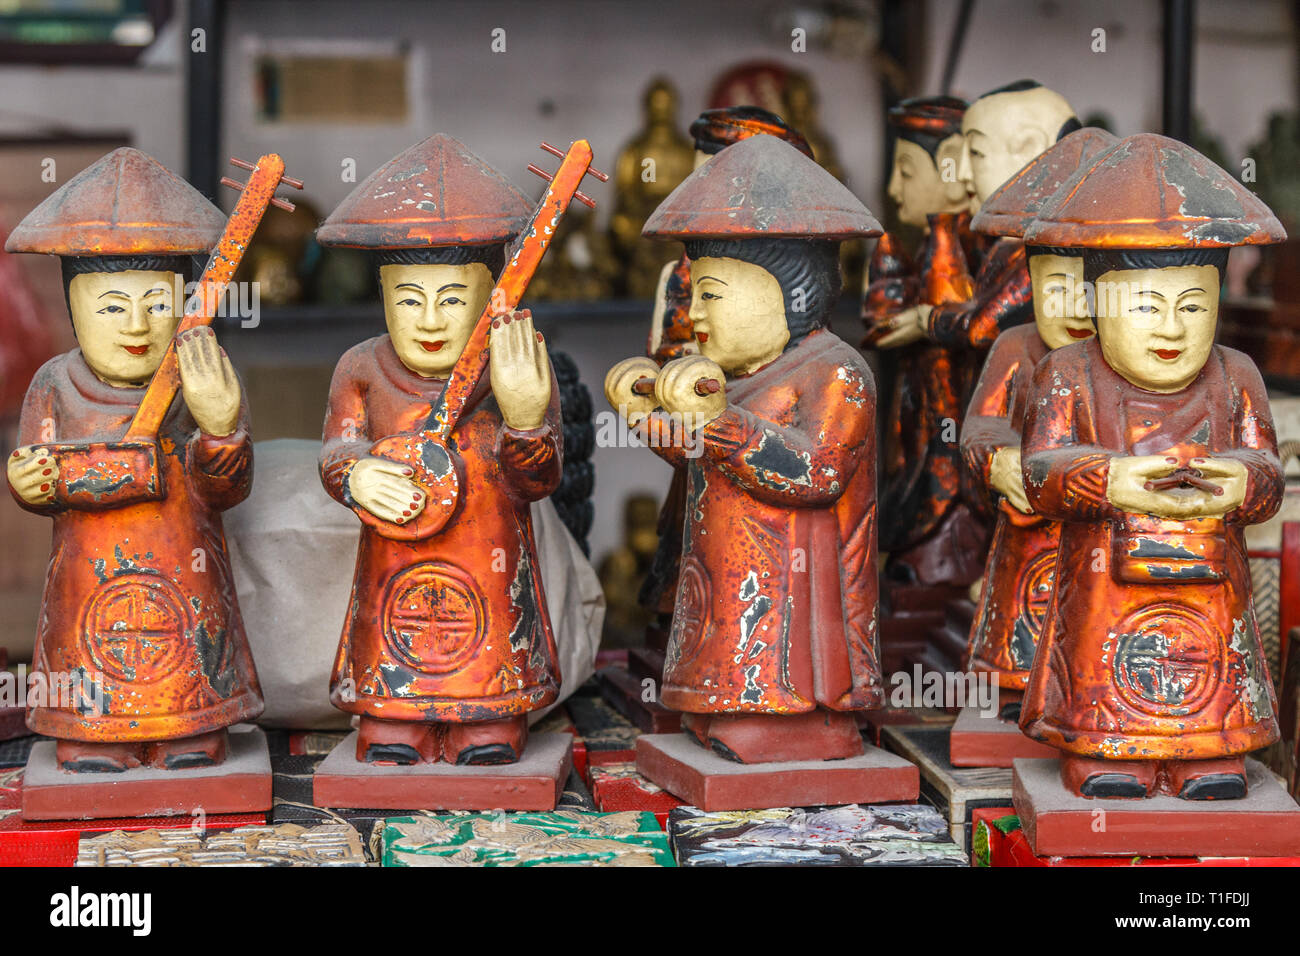 Souvenir wooden dolls of playing music instruments at a street stall in Old Quarter, Hanoi, Vietnam. Stock Photo